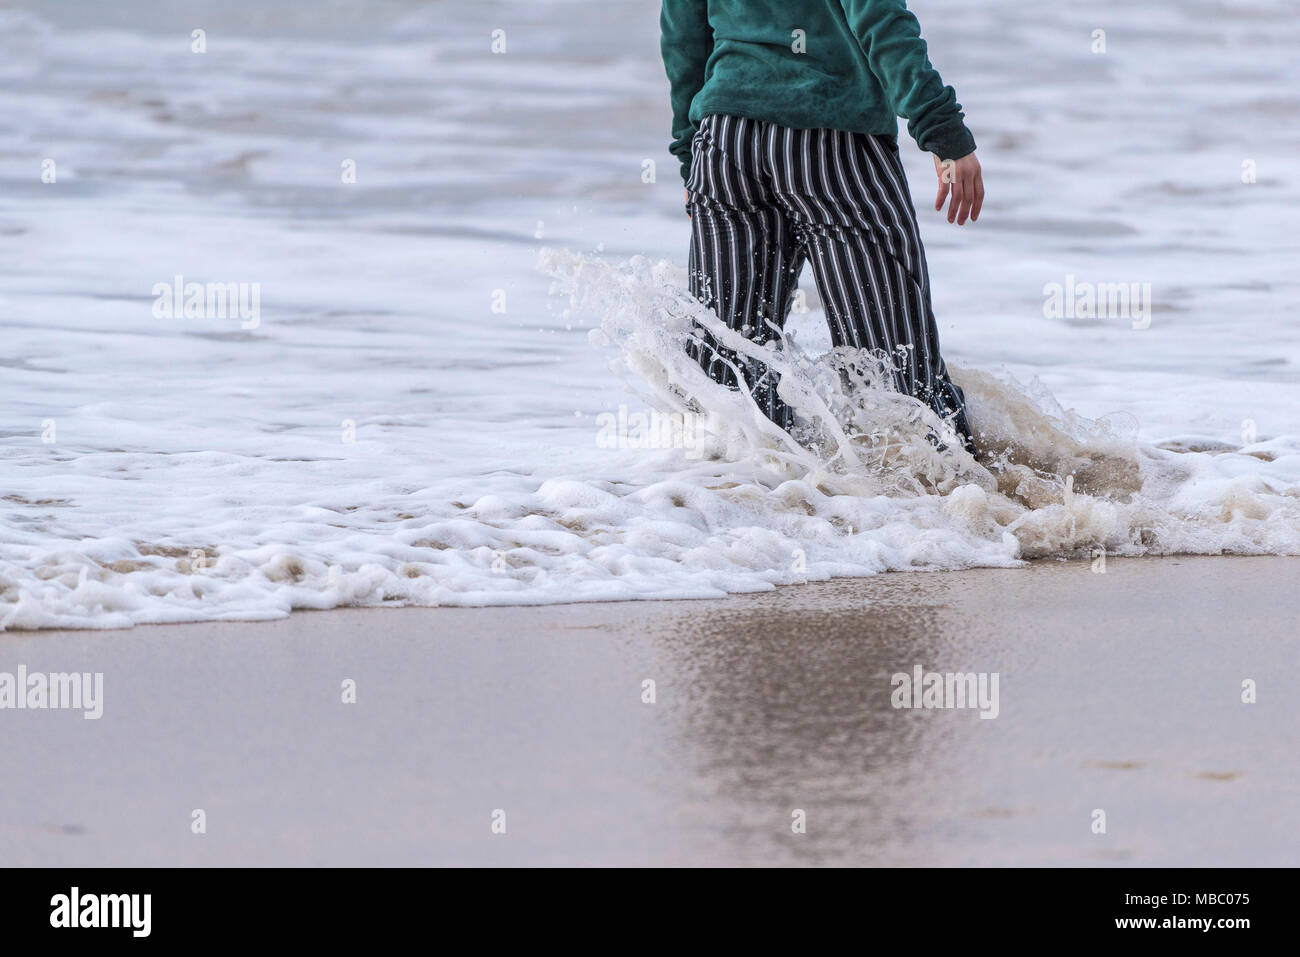 A person standing in the sea as waves break around her legs. Stock Photo